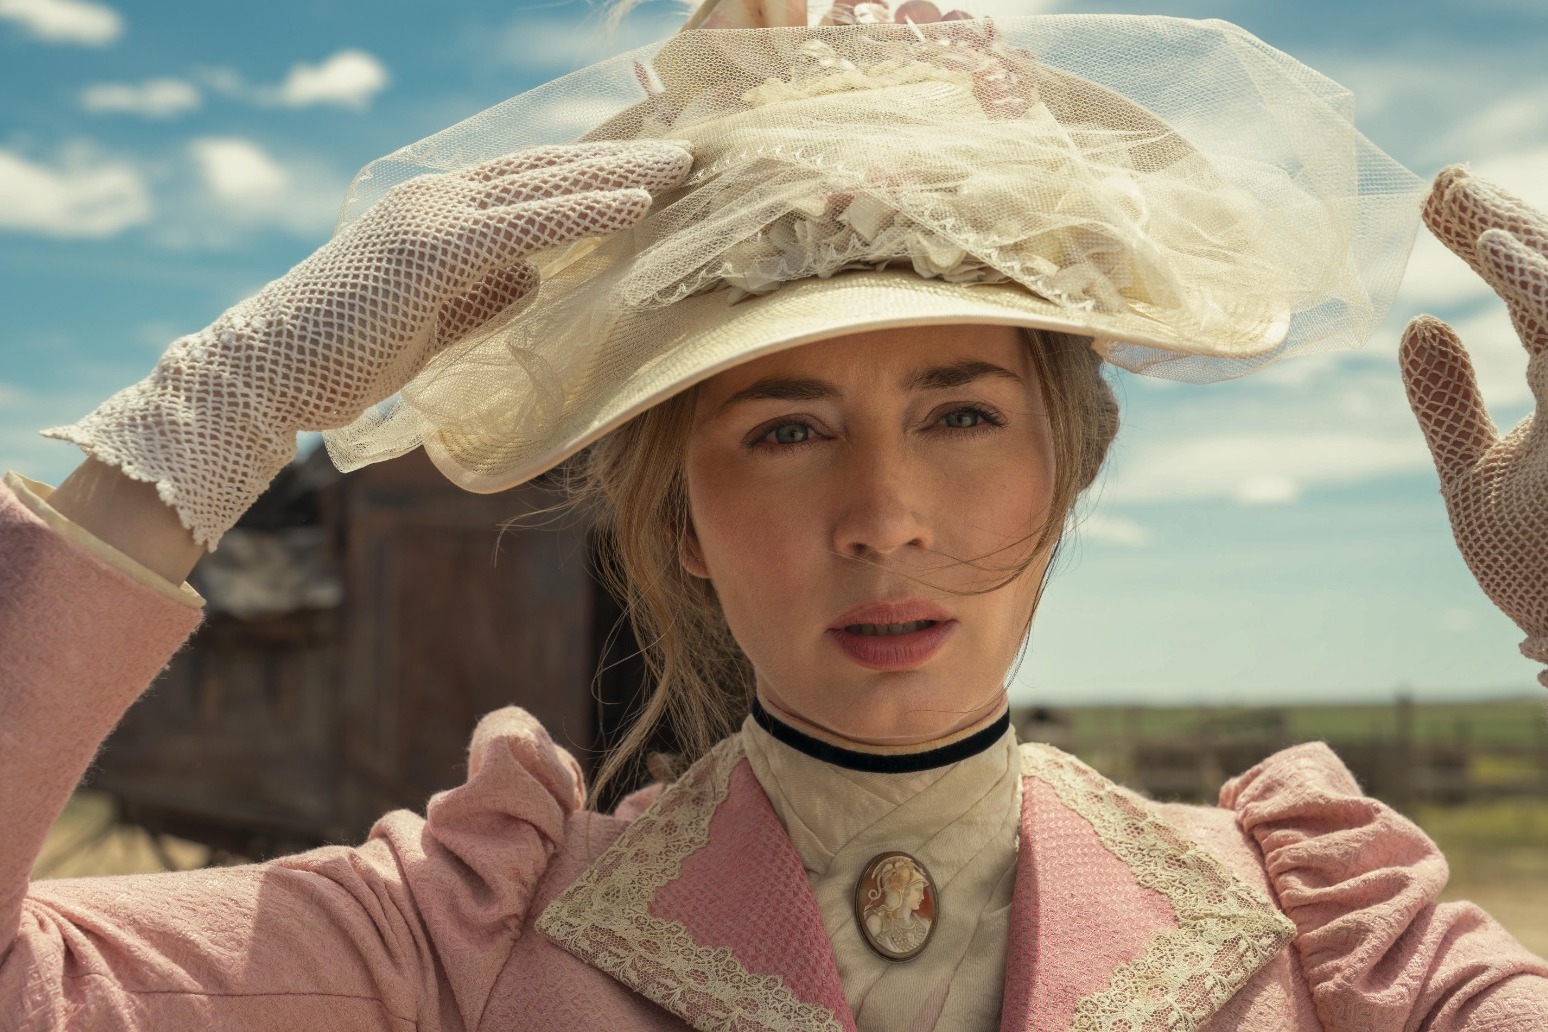 First glimpse of Emily Blunt and Chaske Spencer in new BBC western drama 